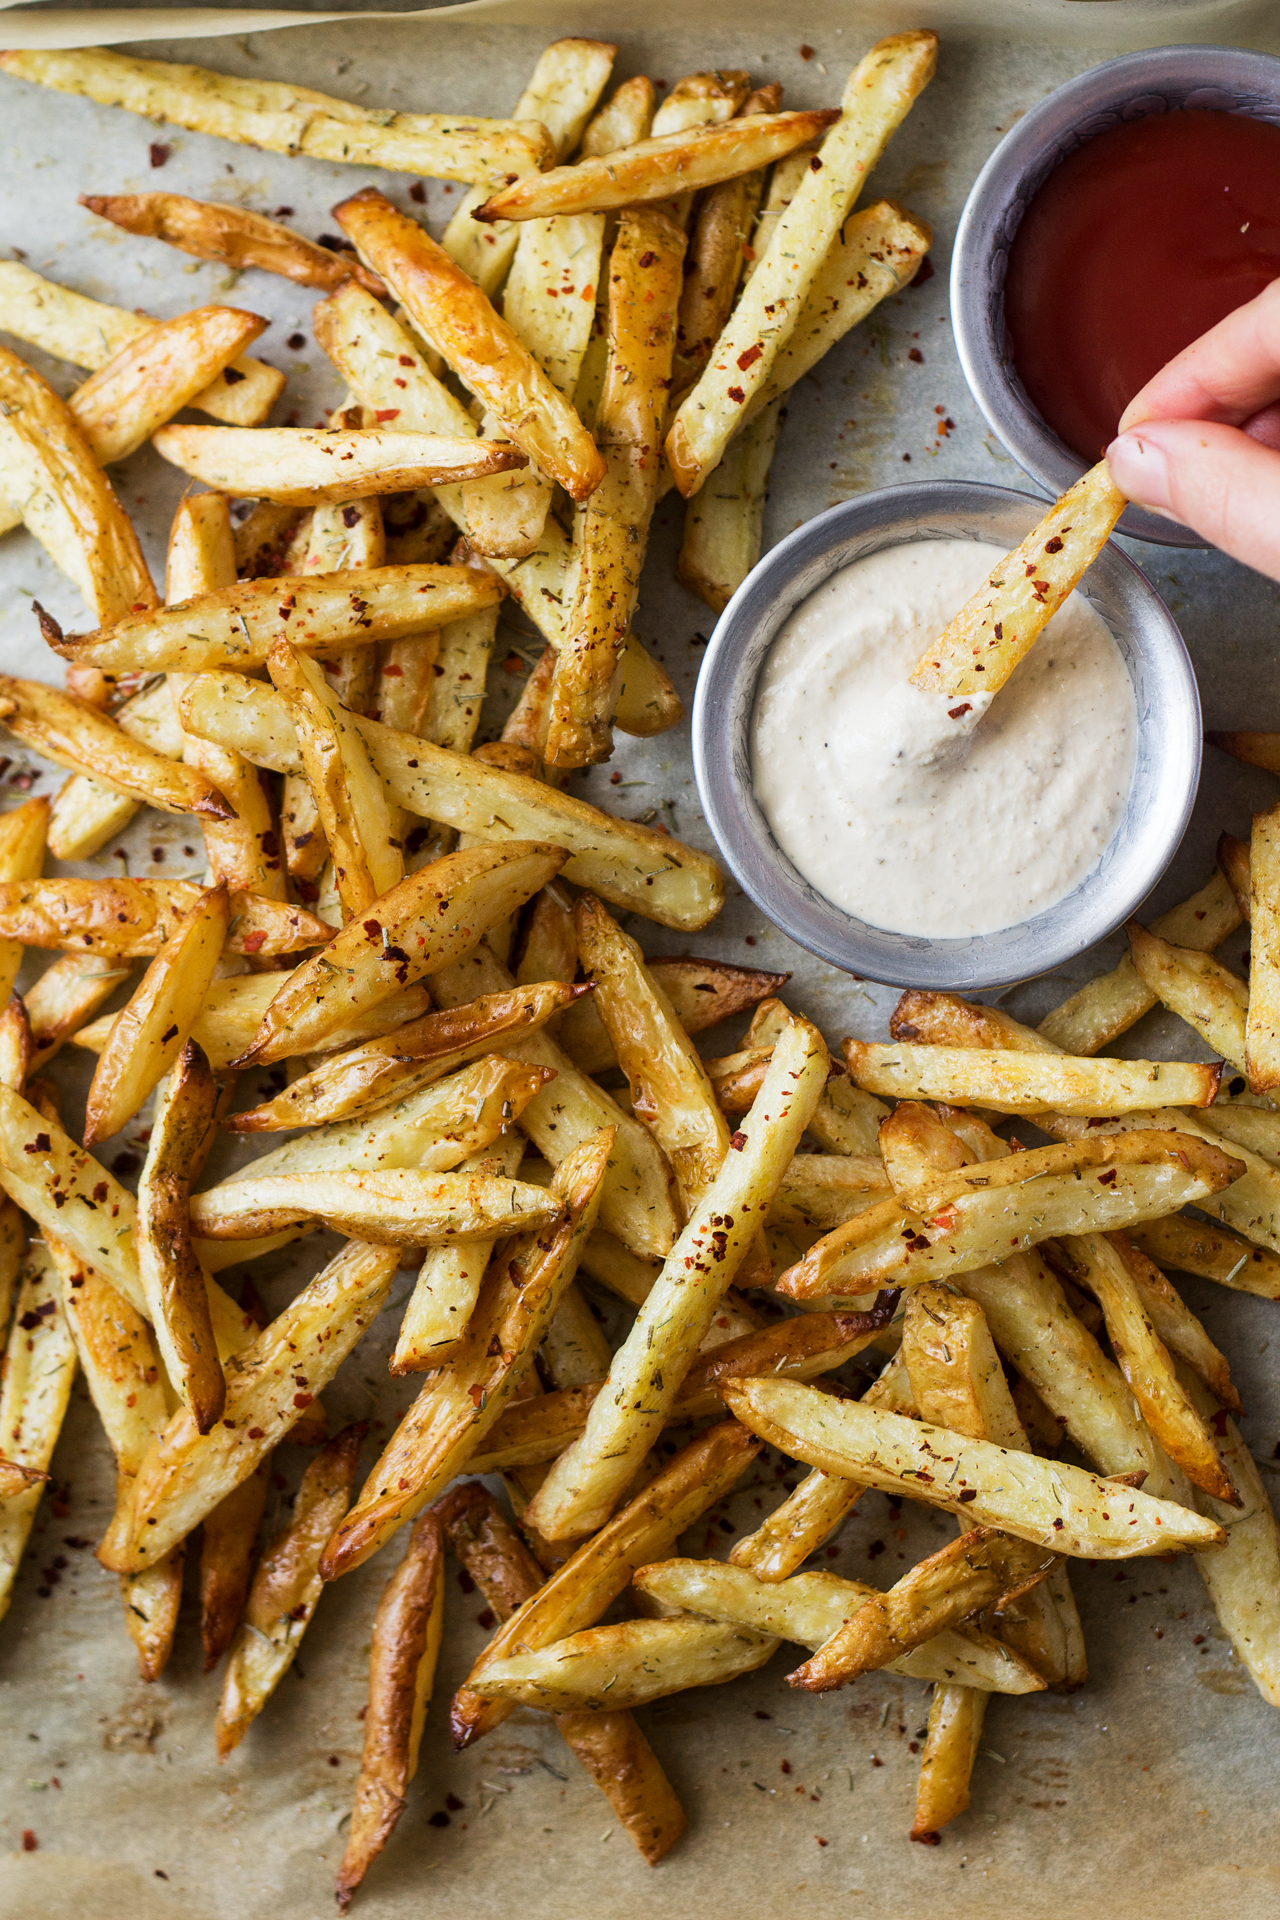 Rosemary fries with roasted garlic dip - Lazy Cat Kitchen